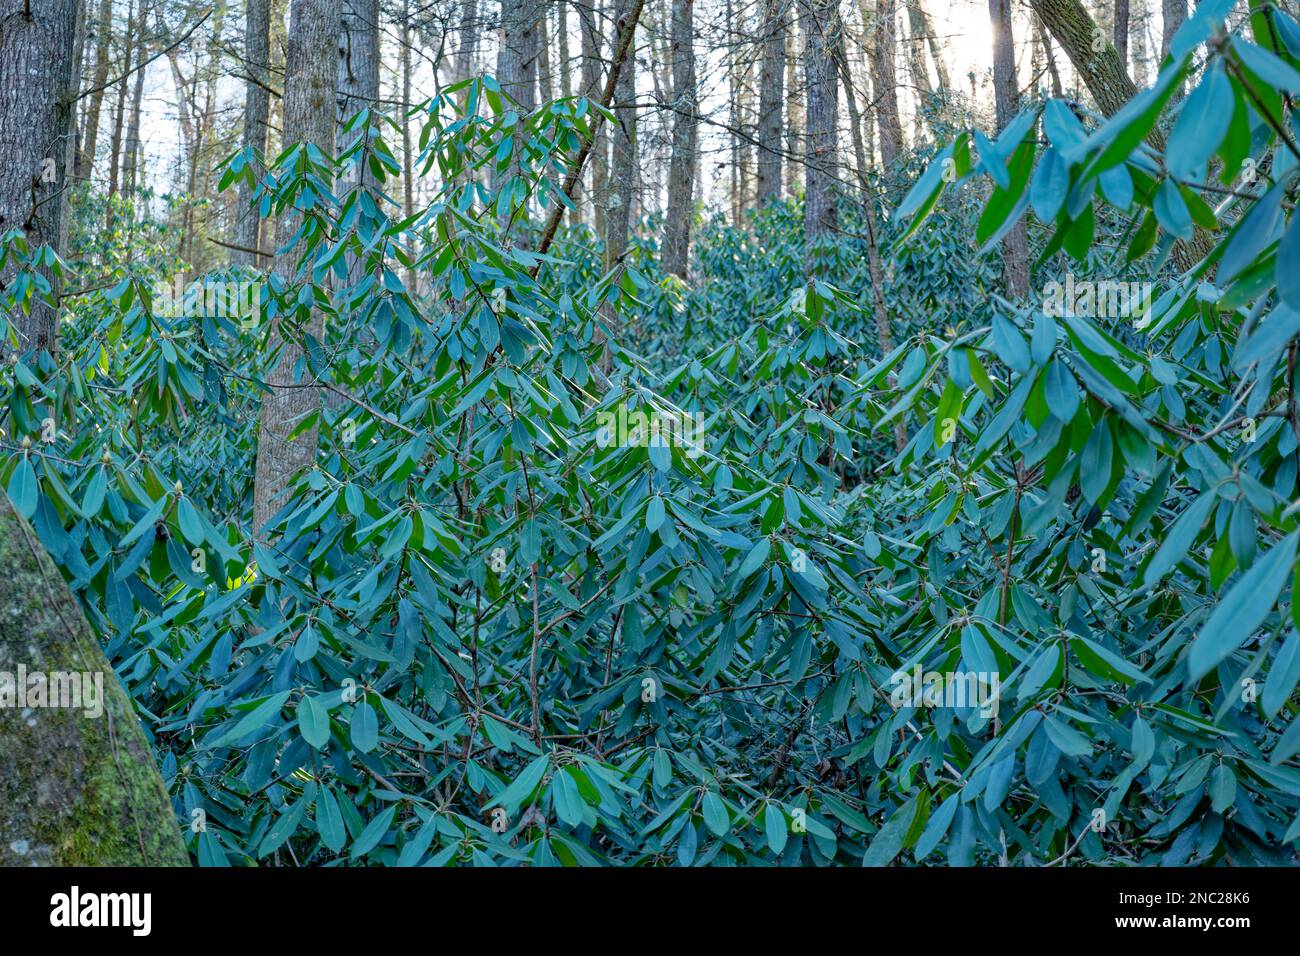 Thick full grown rhododendron bushes growing on the mountain in a forest in the shade in winter closeup view Stock Photo